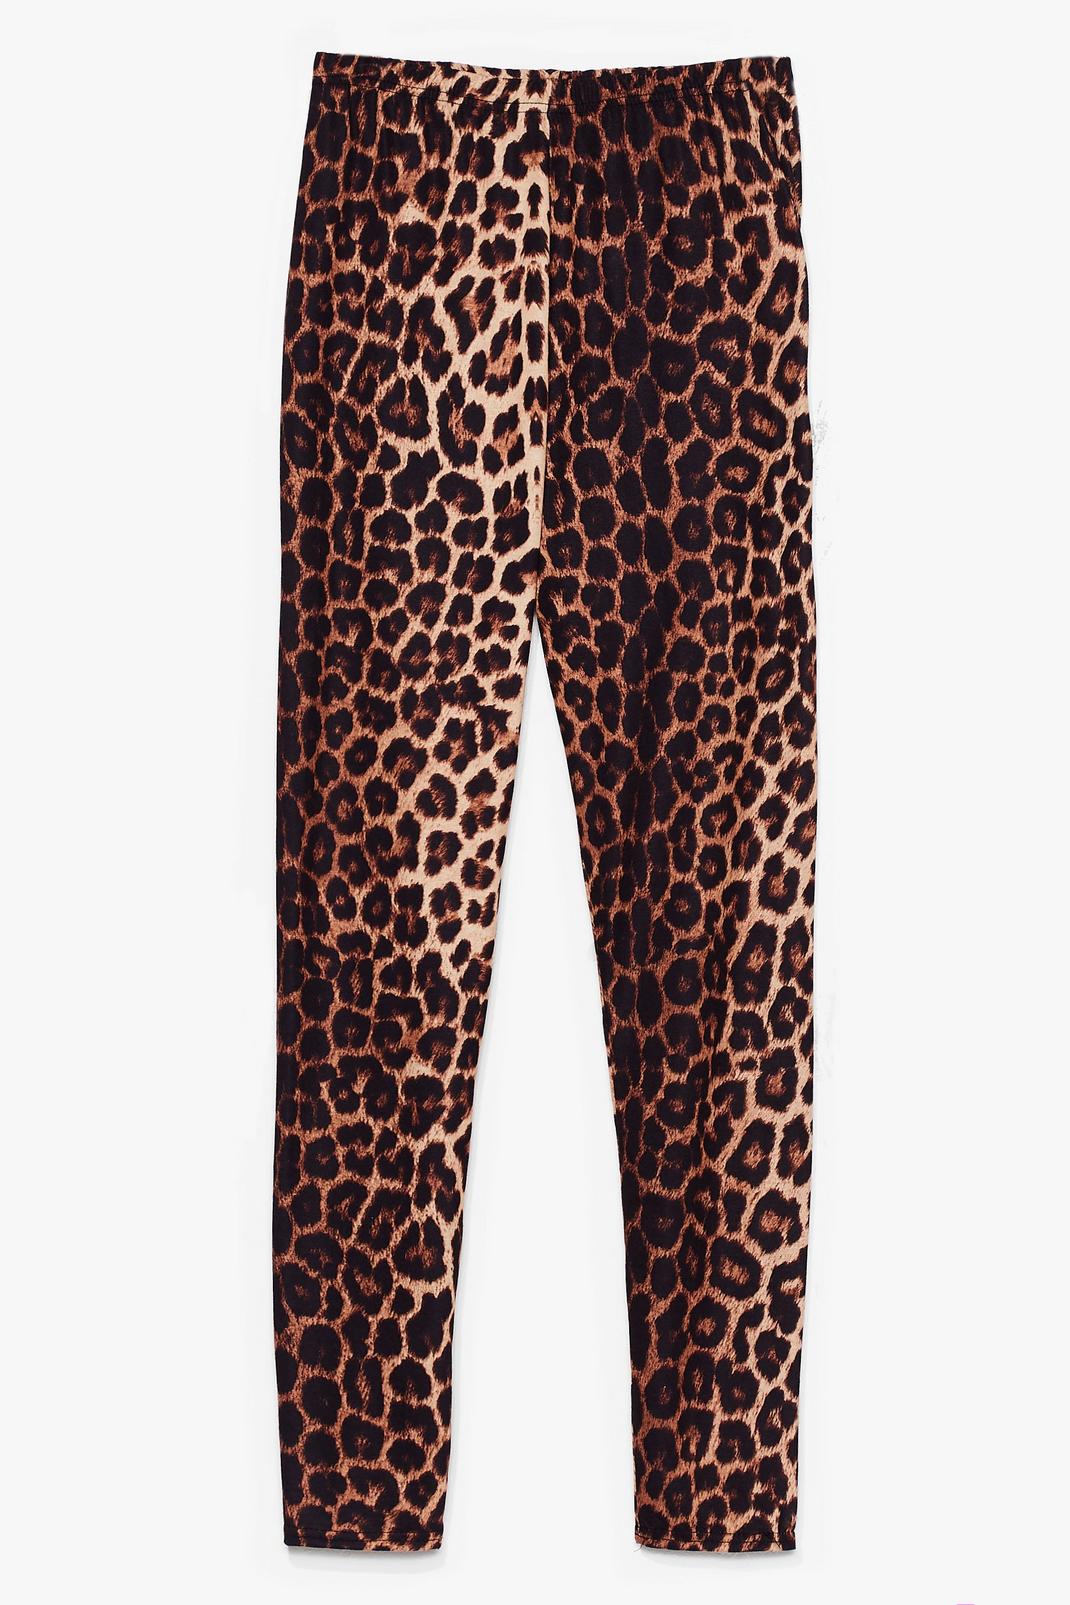 Cat Stop Loving You High-Waisted Leopard Leggings image number 1